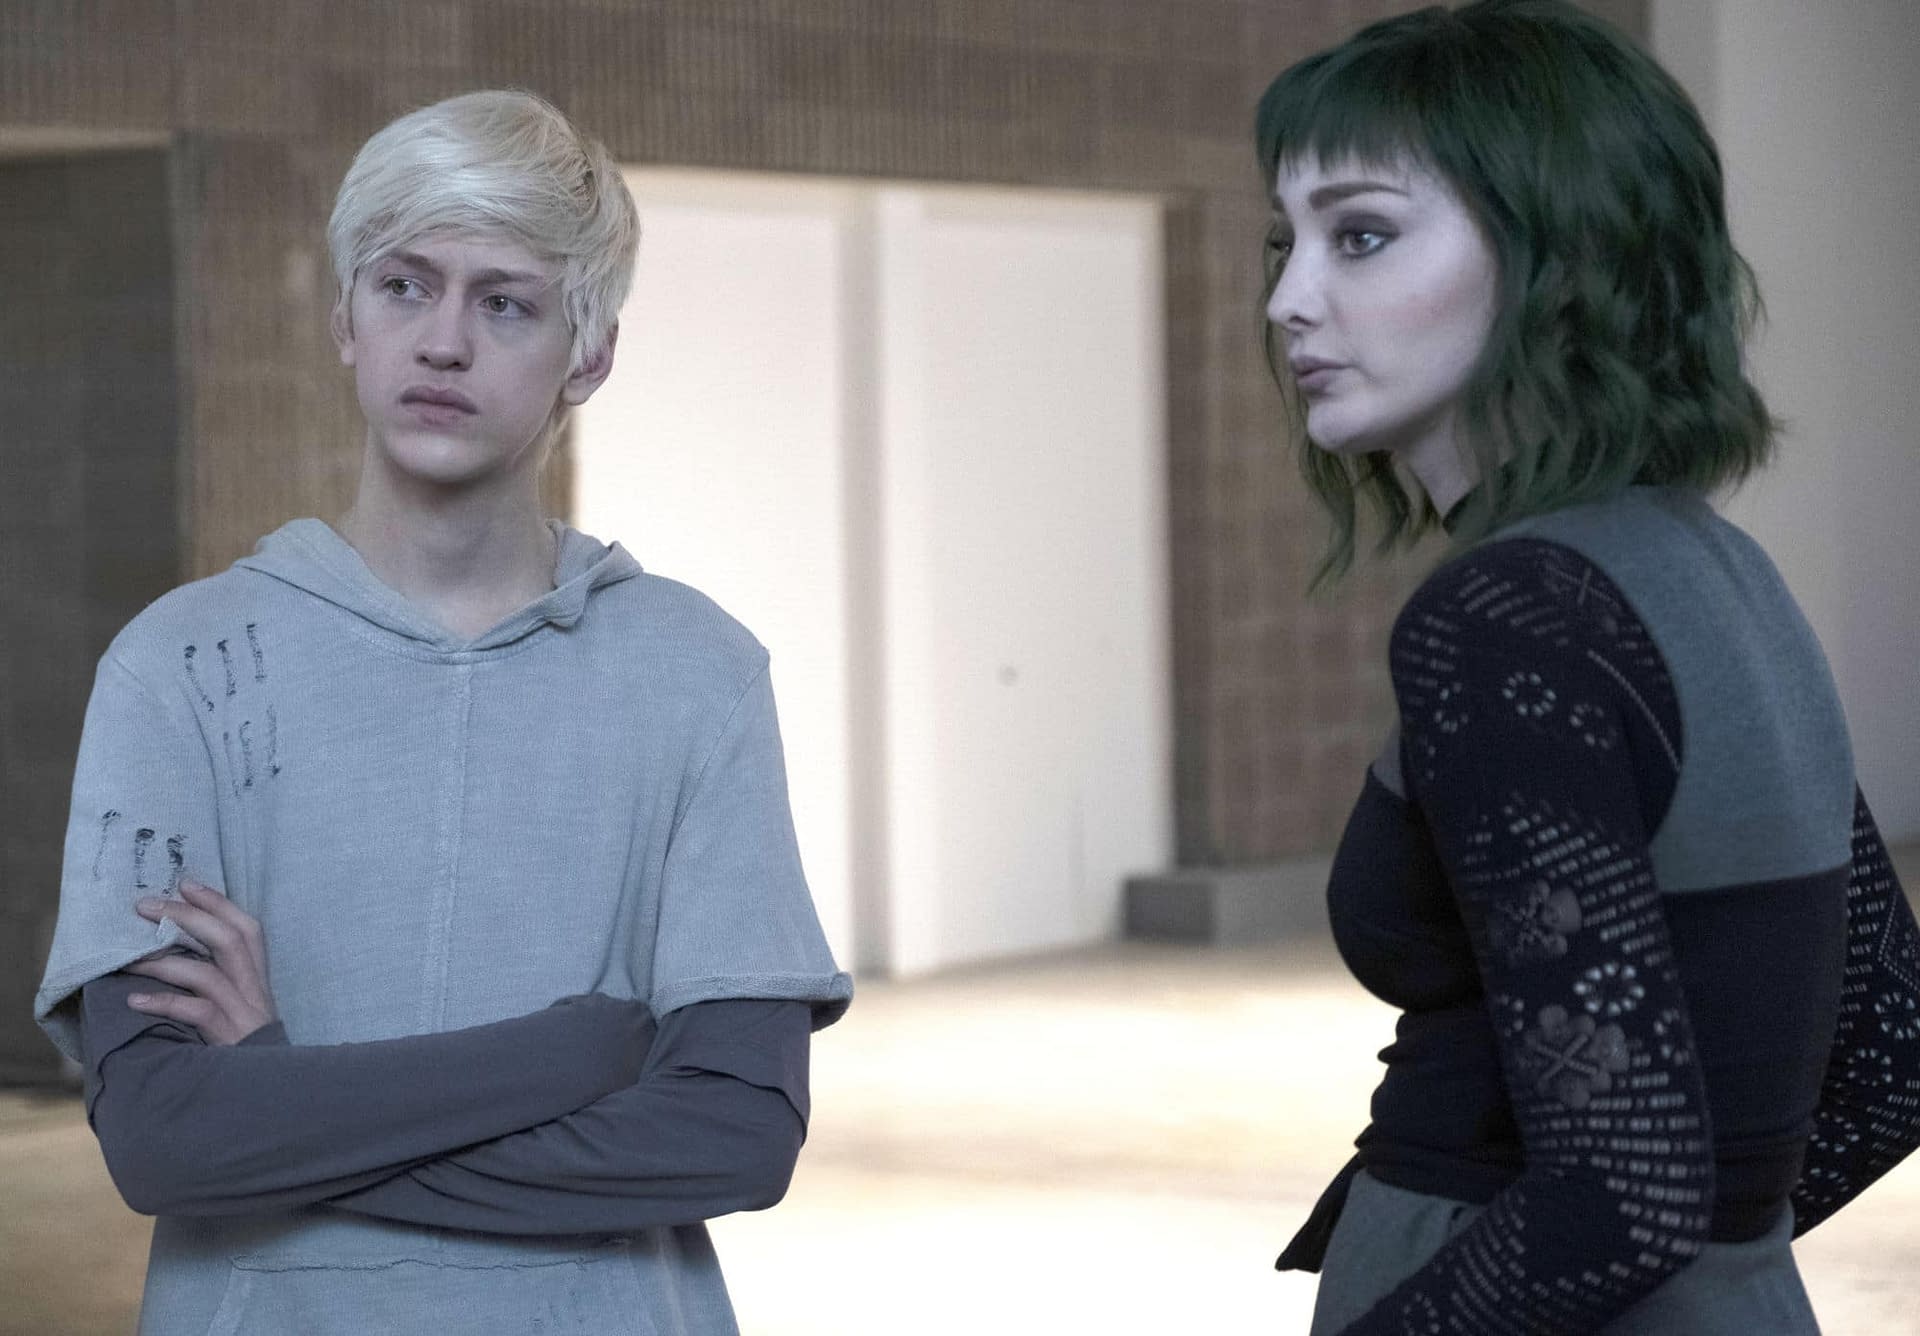 The Gifted Season 2 Episode 14: [MINOR SPOILERS] 16 Pictures from the New Episode